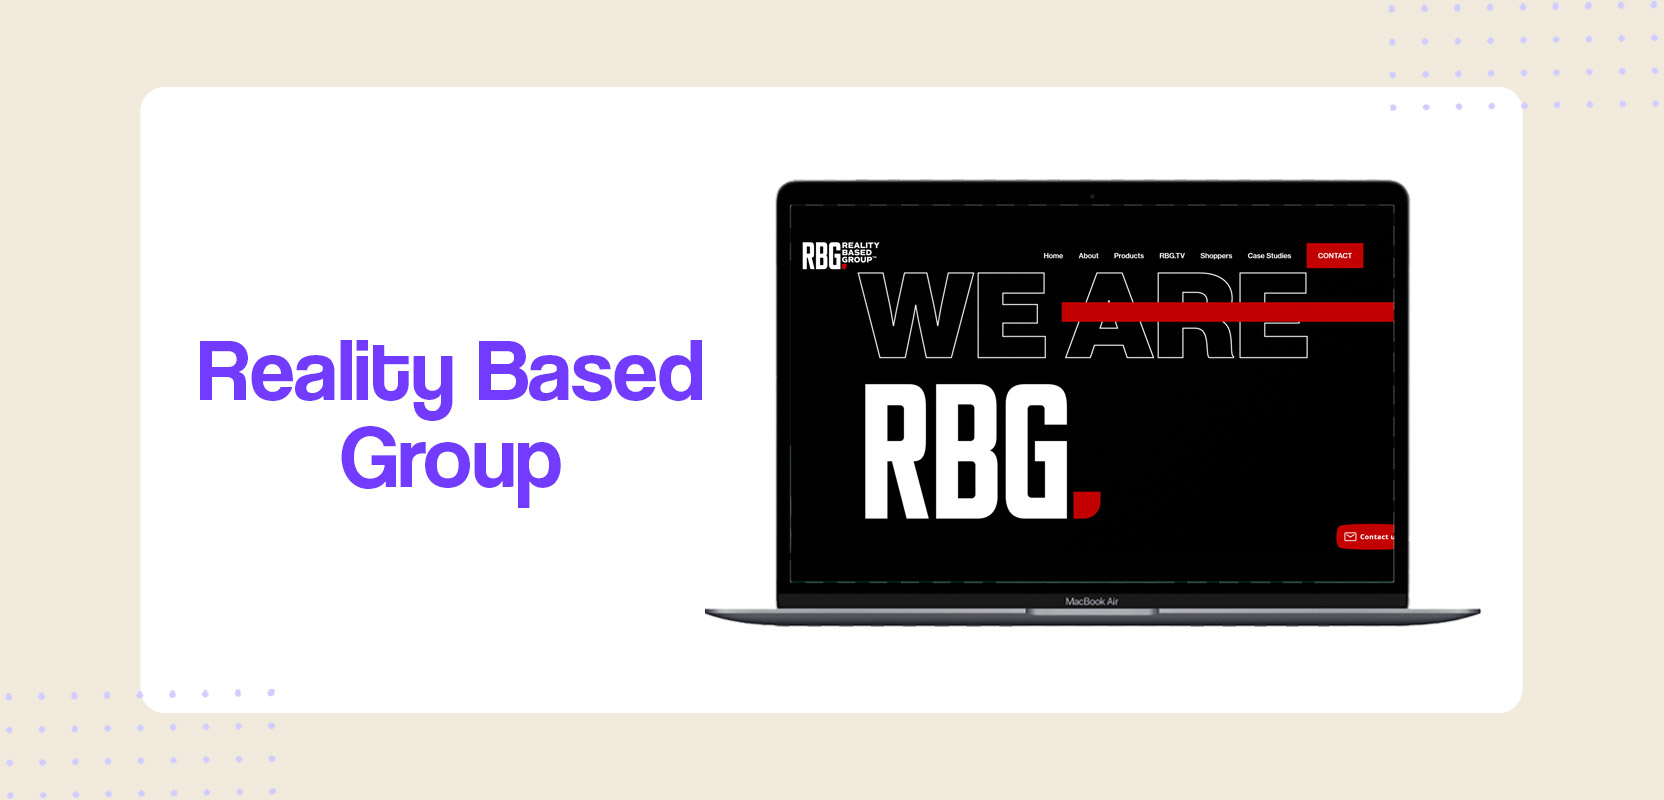 Laptop screen showing the Reality Based Group website